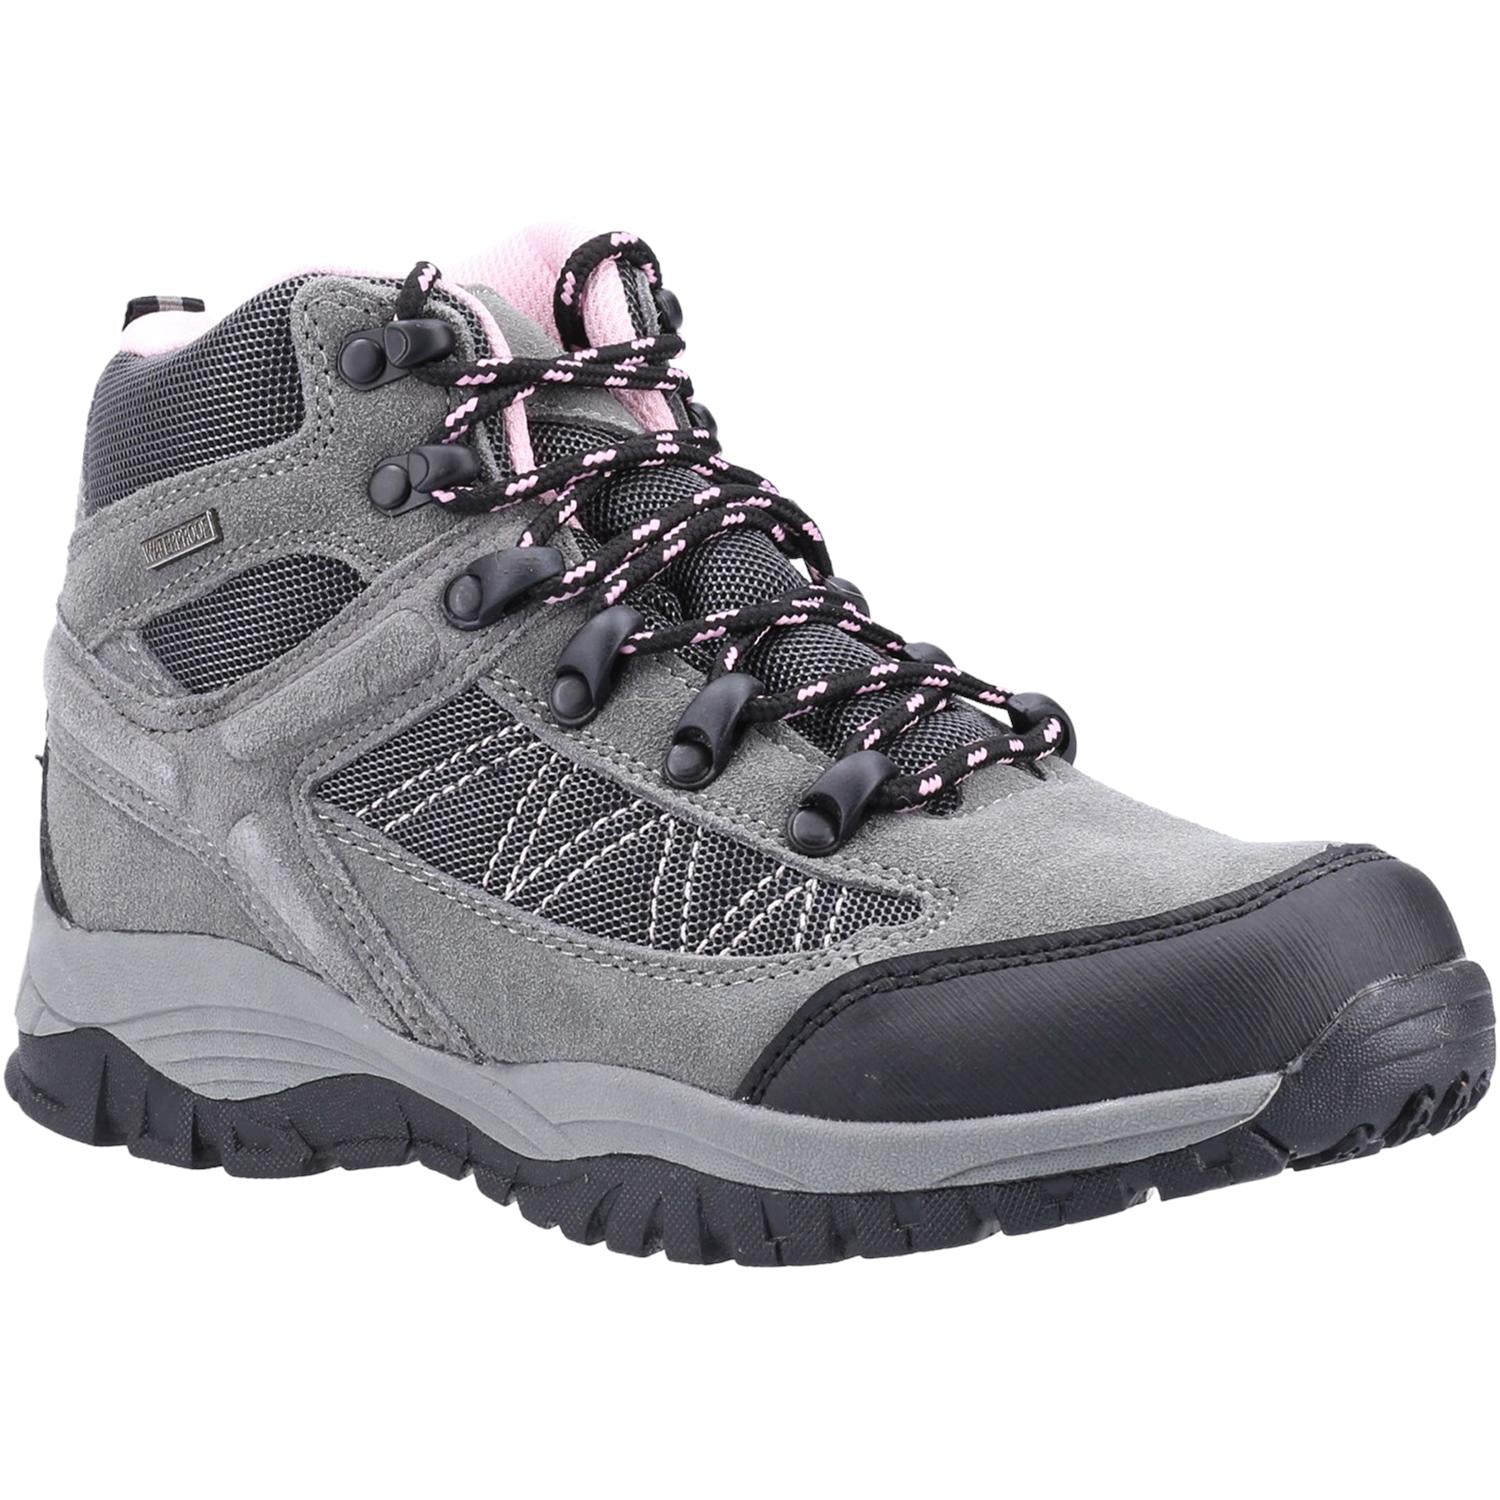 Cotswold Maisemore Ladies Hiking Boot